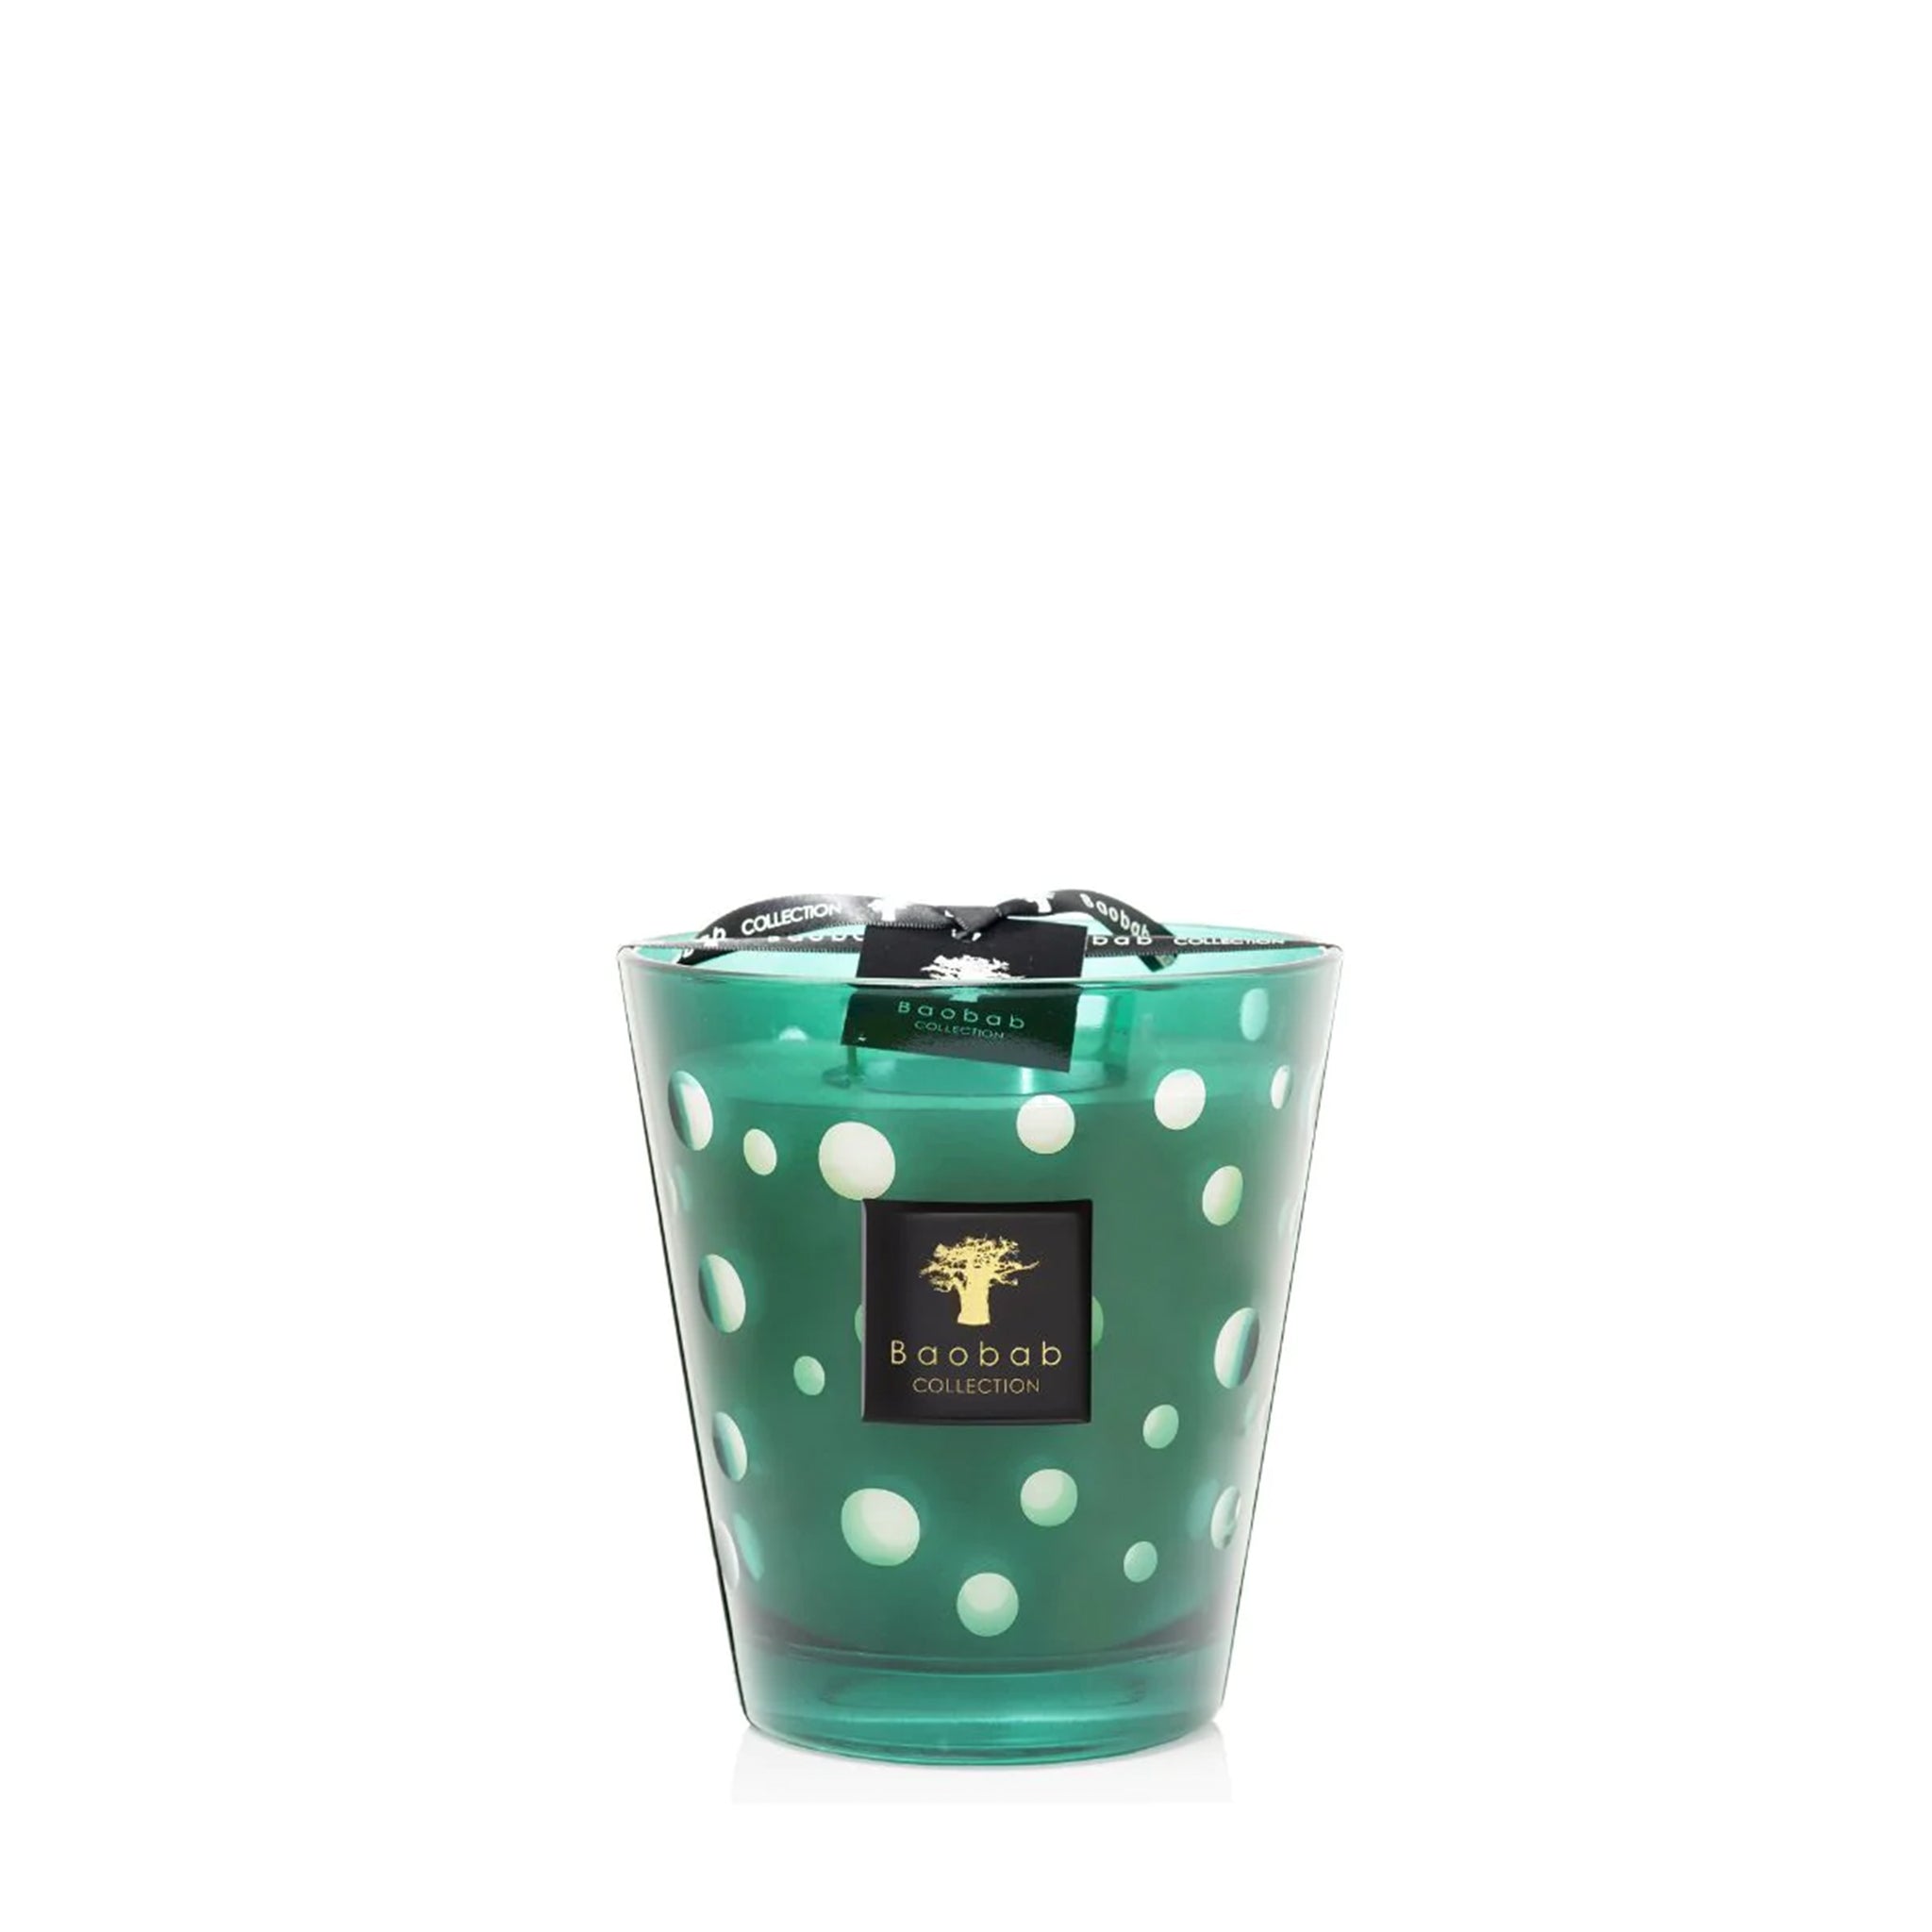 baobab bubbles green max16 baobab scented candle scented candles 